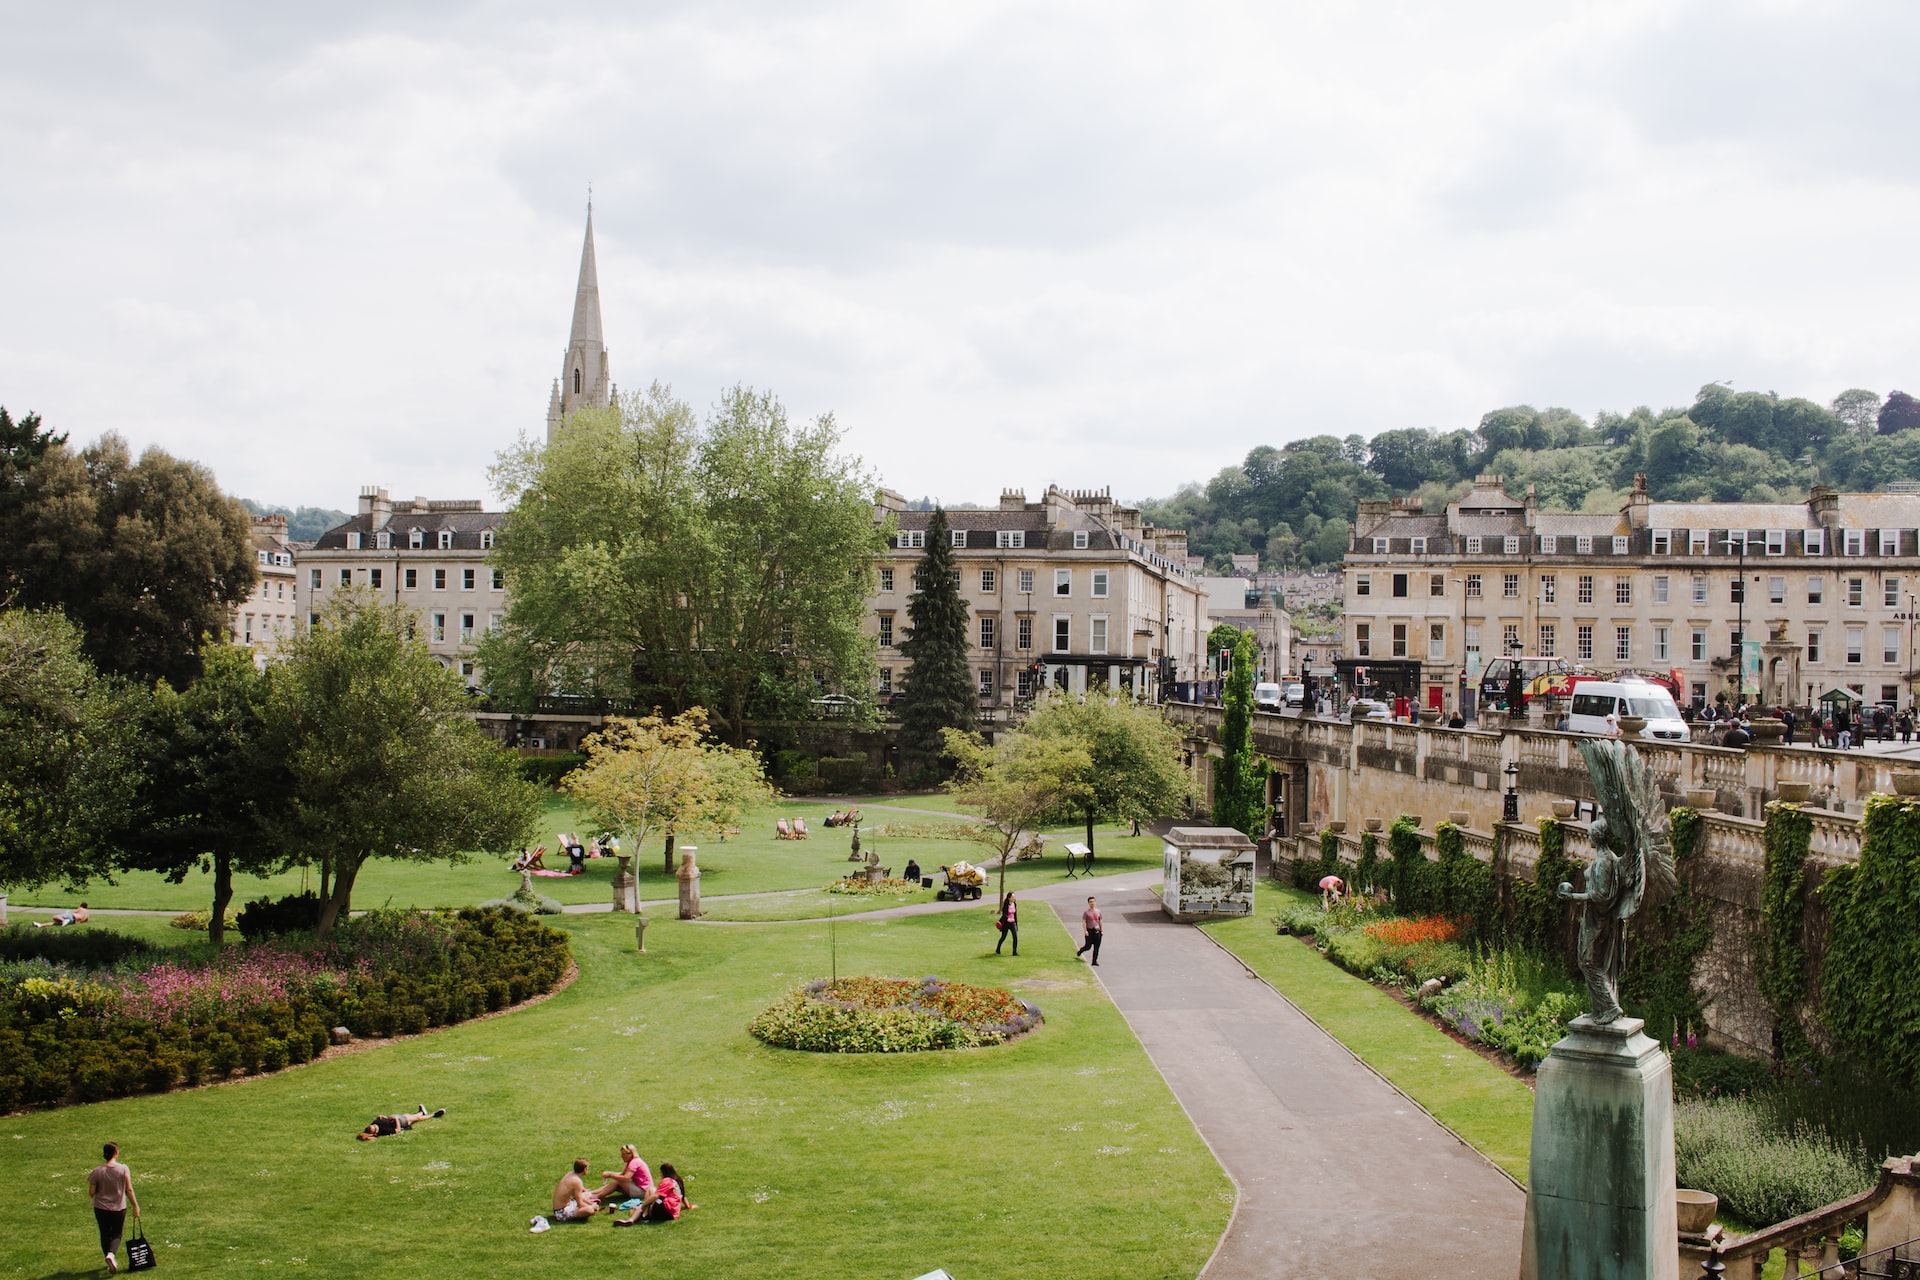 Things to do after work in Bath